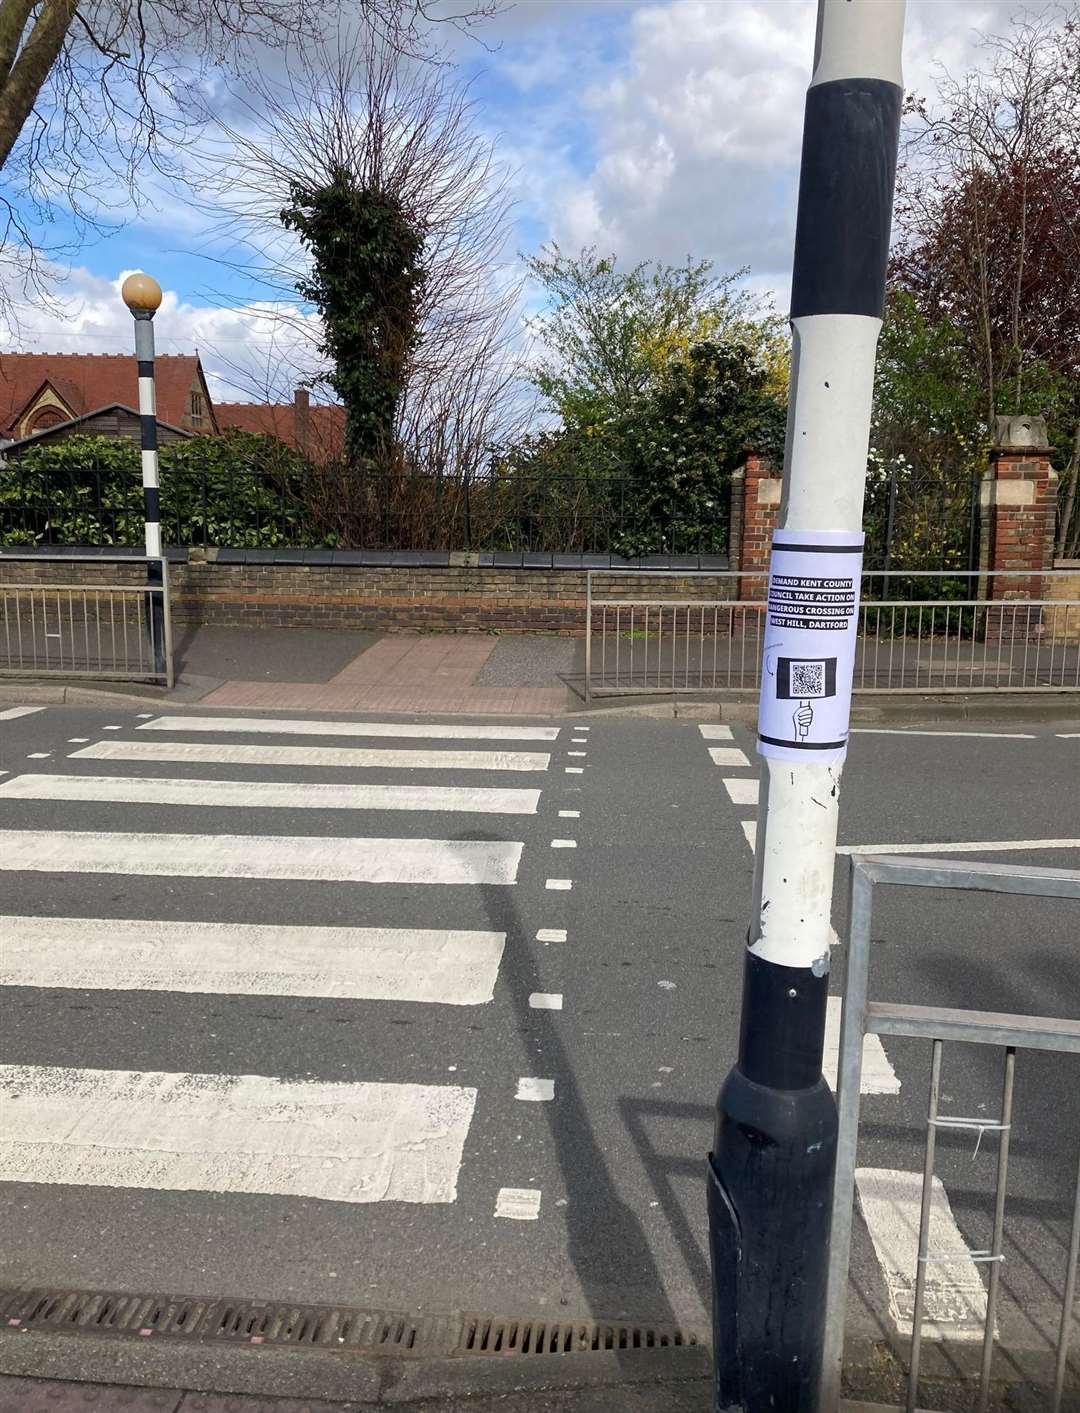 The crossing outside West Hill Primary Academy in Dartford Road, Dartford. Photo credit: Garry Turner